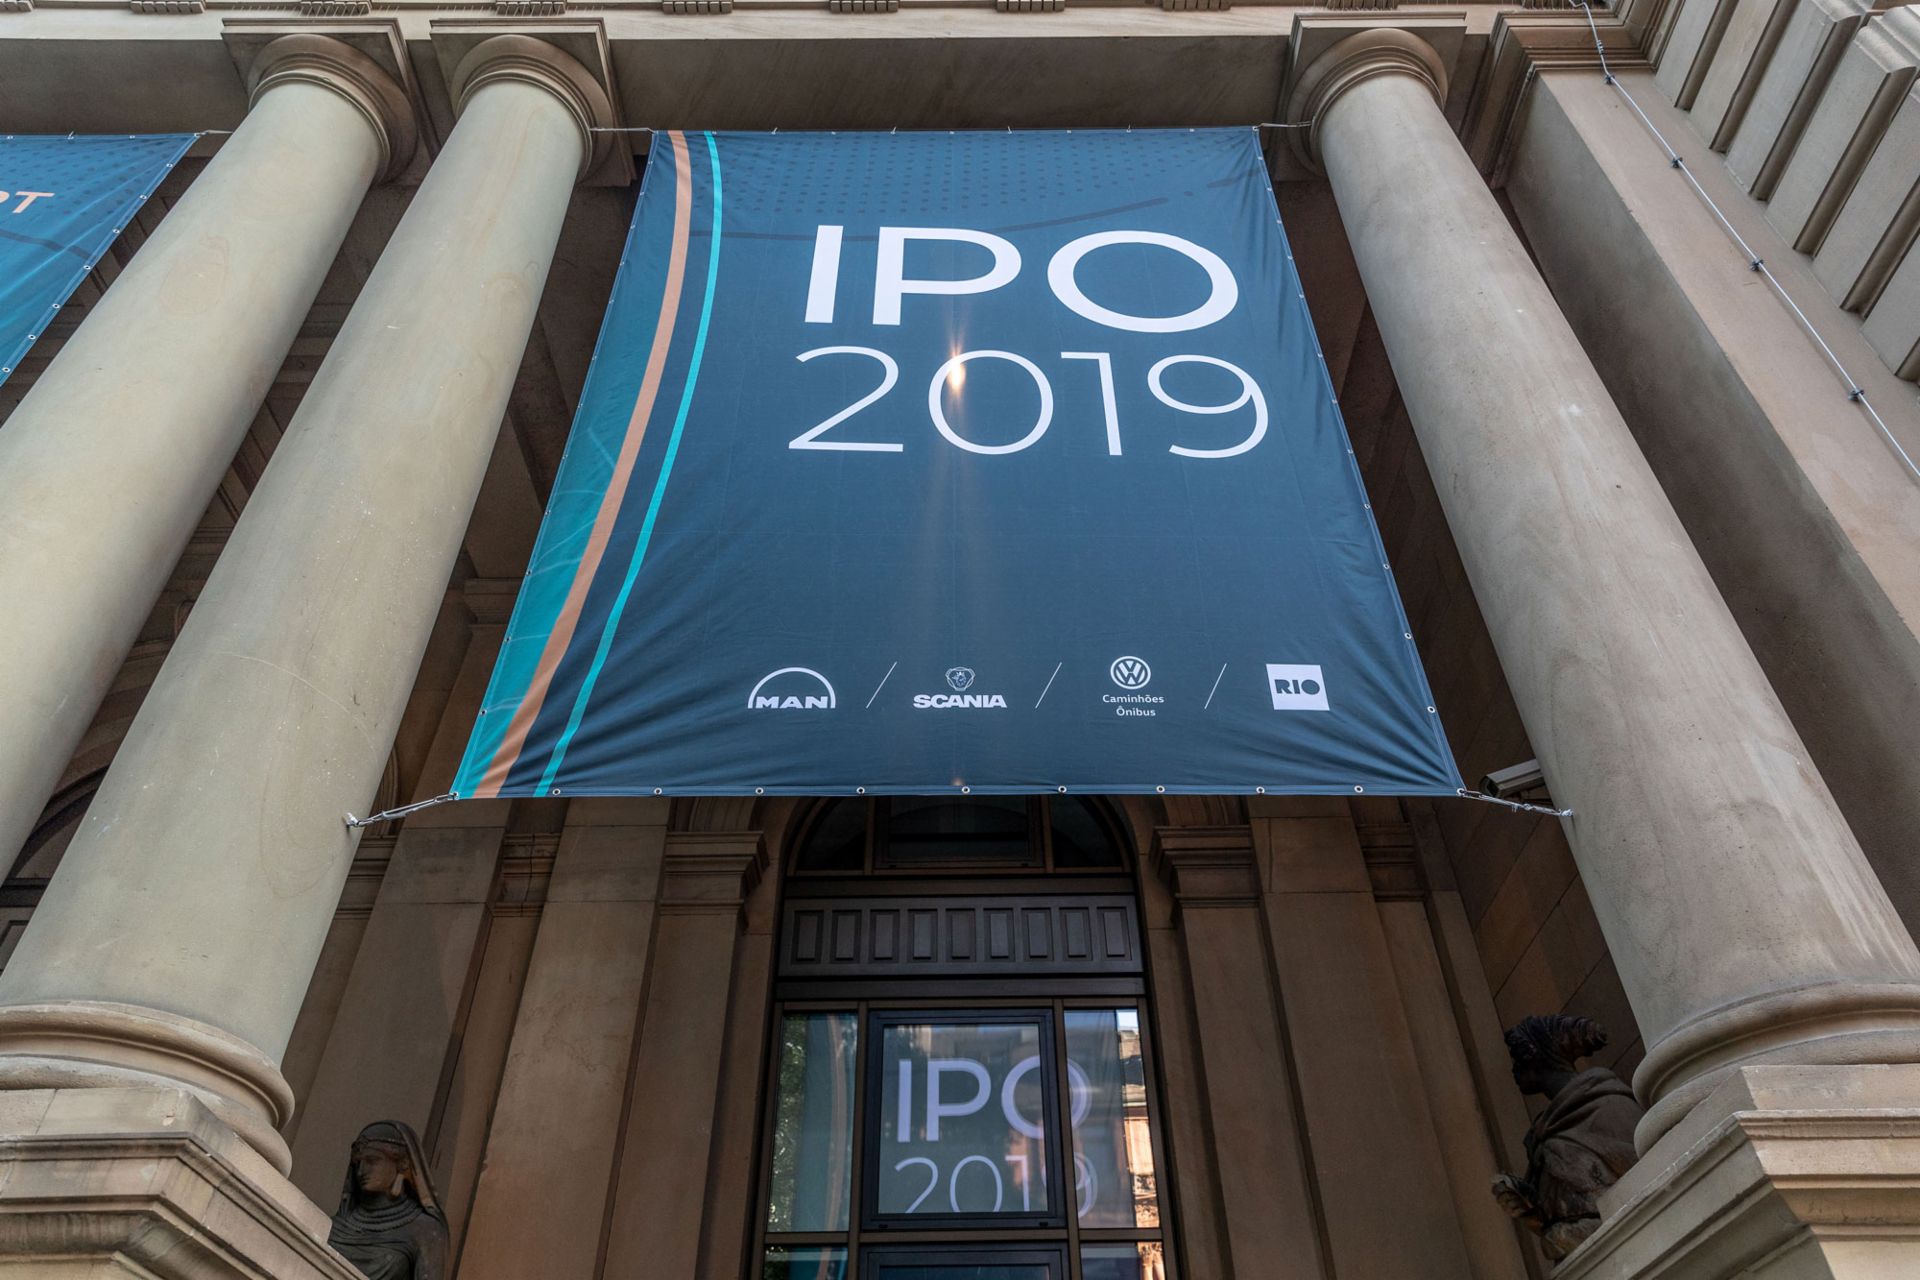 The TRATON IPO is one of the largest European IPOs for 2019.
                 